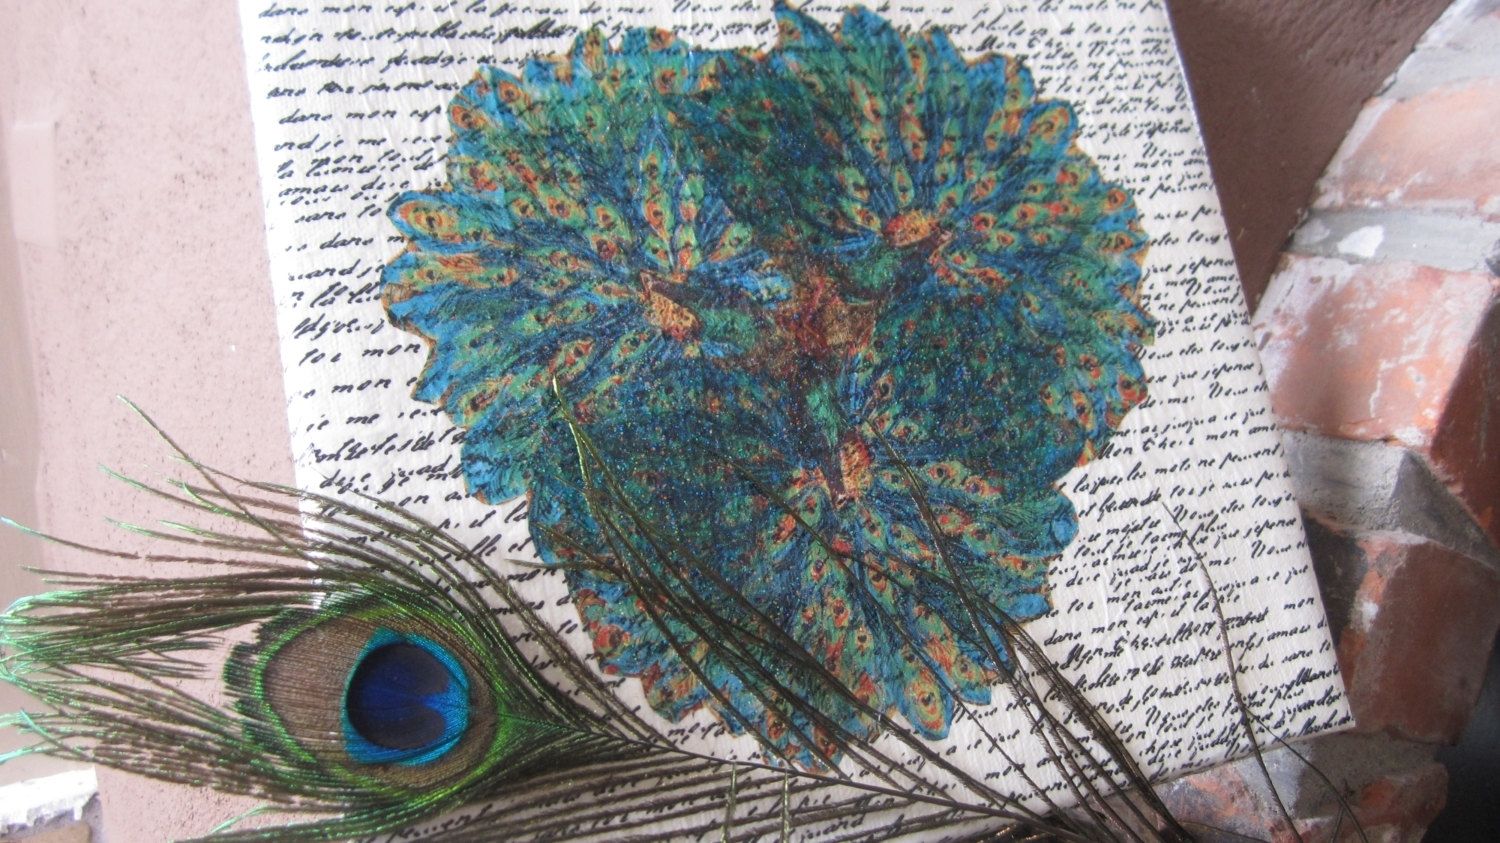 Handmade Peacock Decoupage Napkin Art On Canvas 10 X 10 Inches by